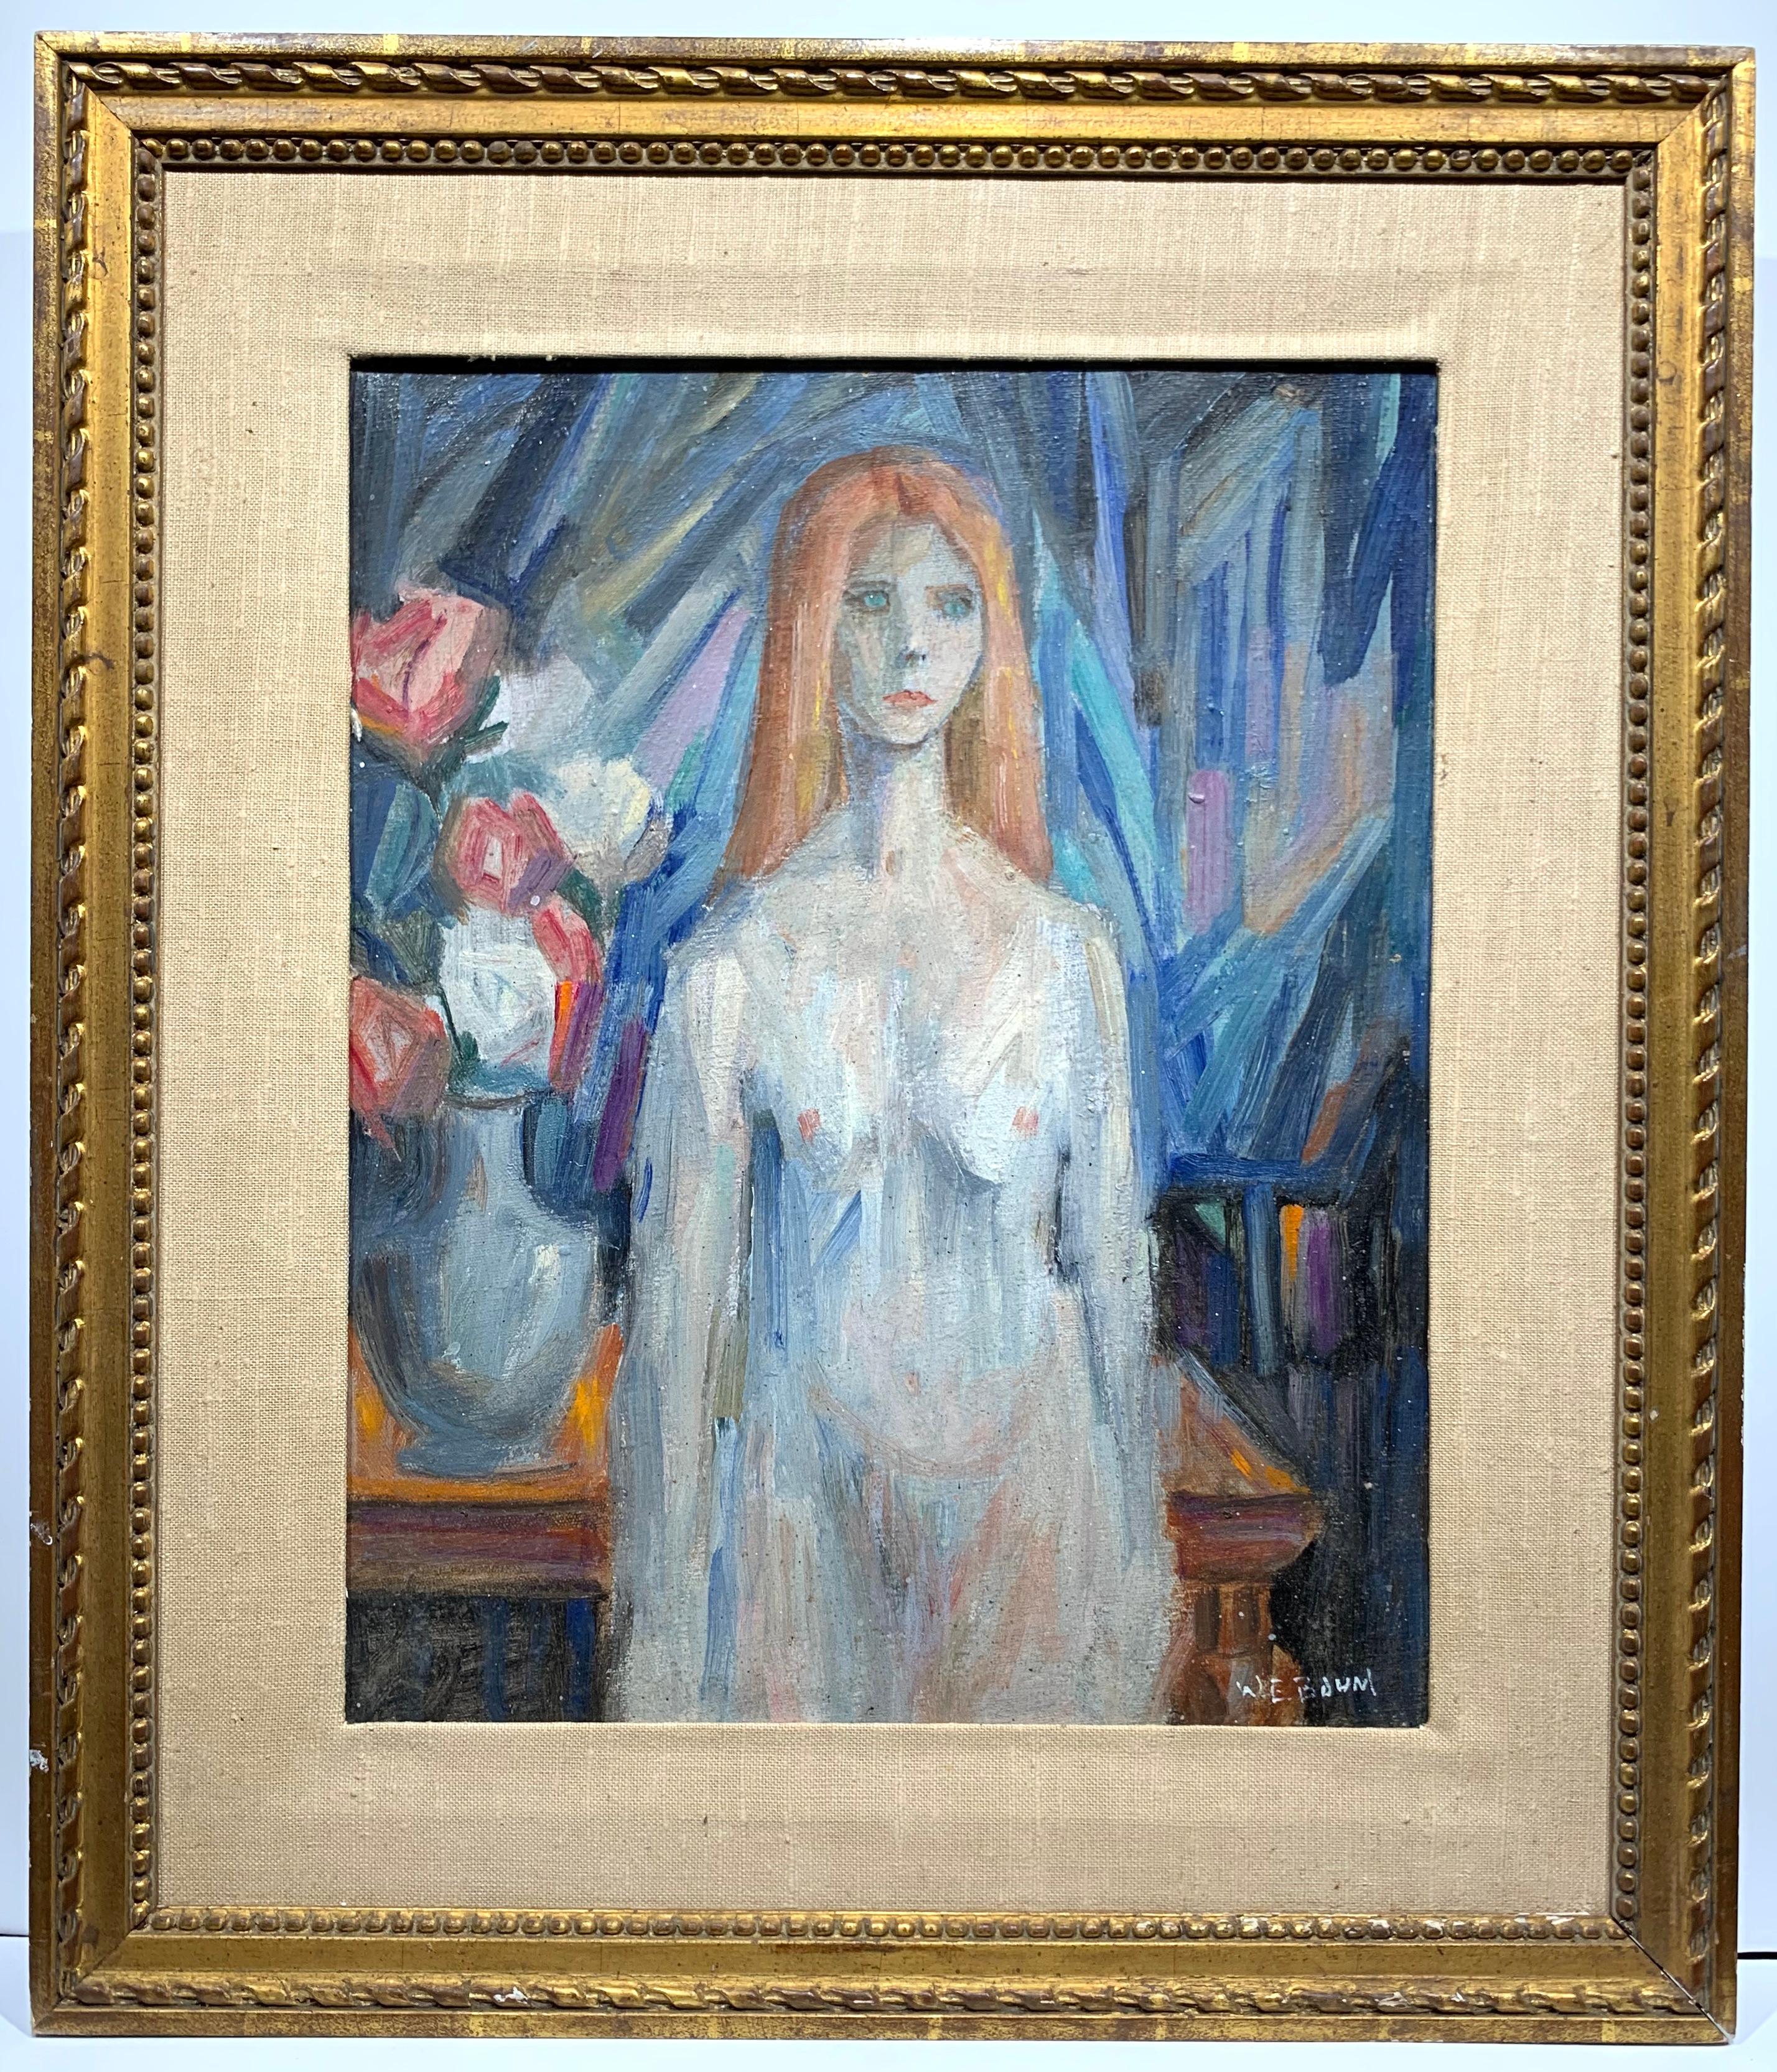 Portrait of a Nude Red Headed Woman - Gray Abstract Painting by Walter Emerson Baum